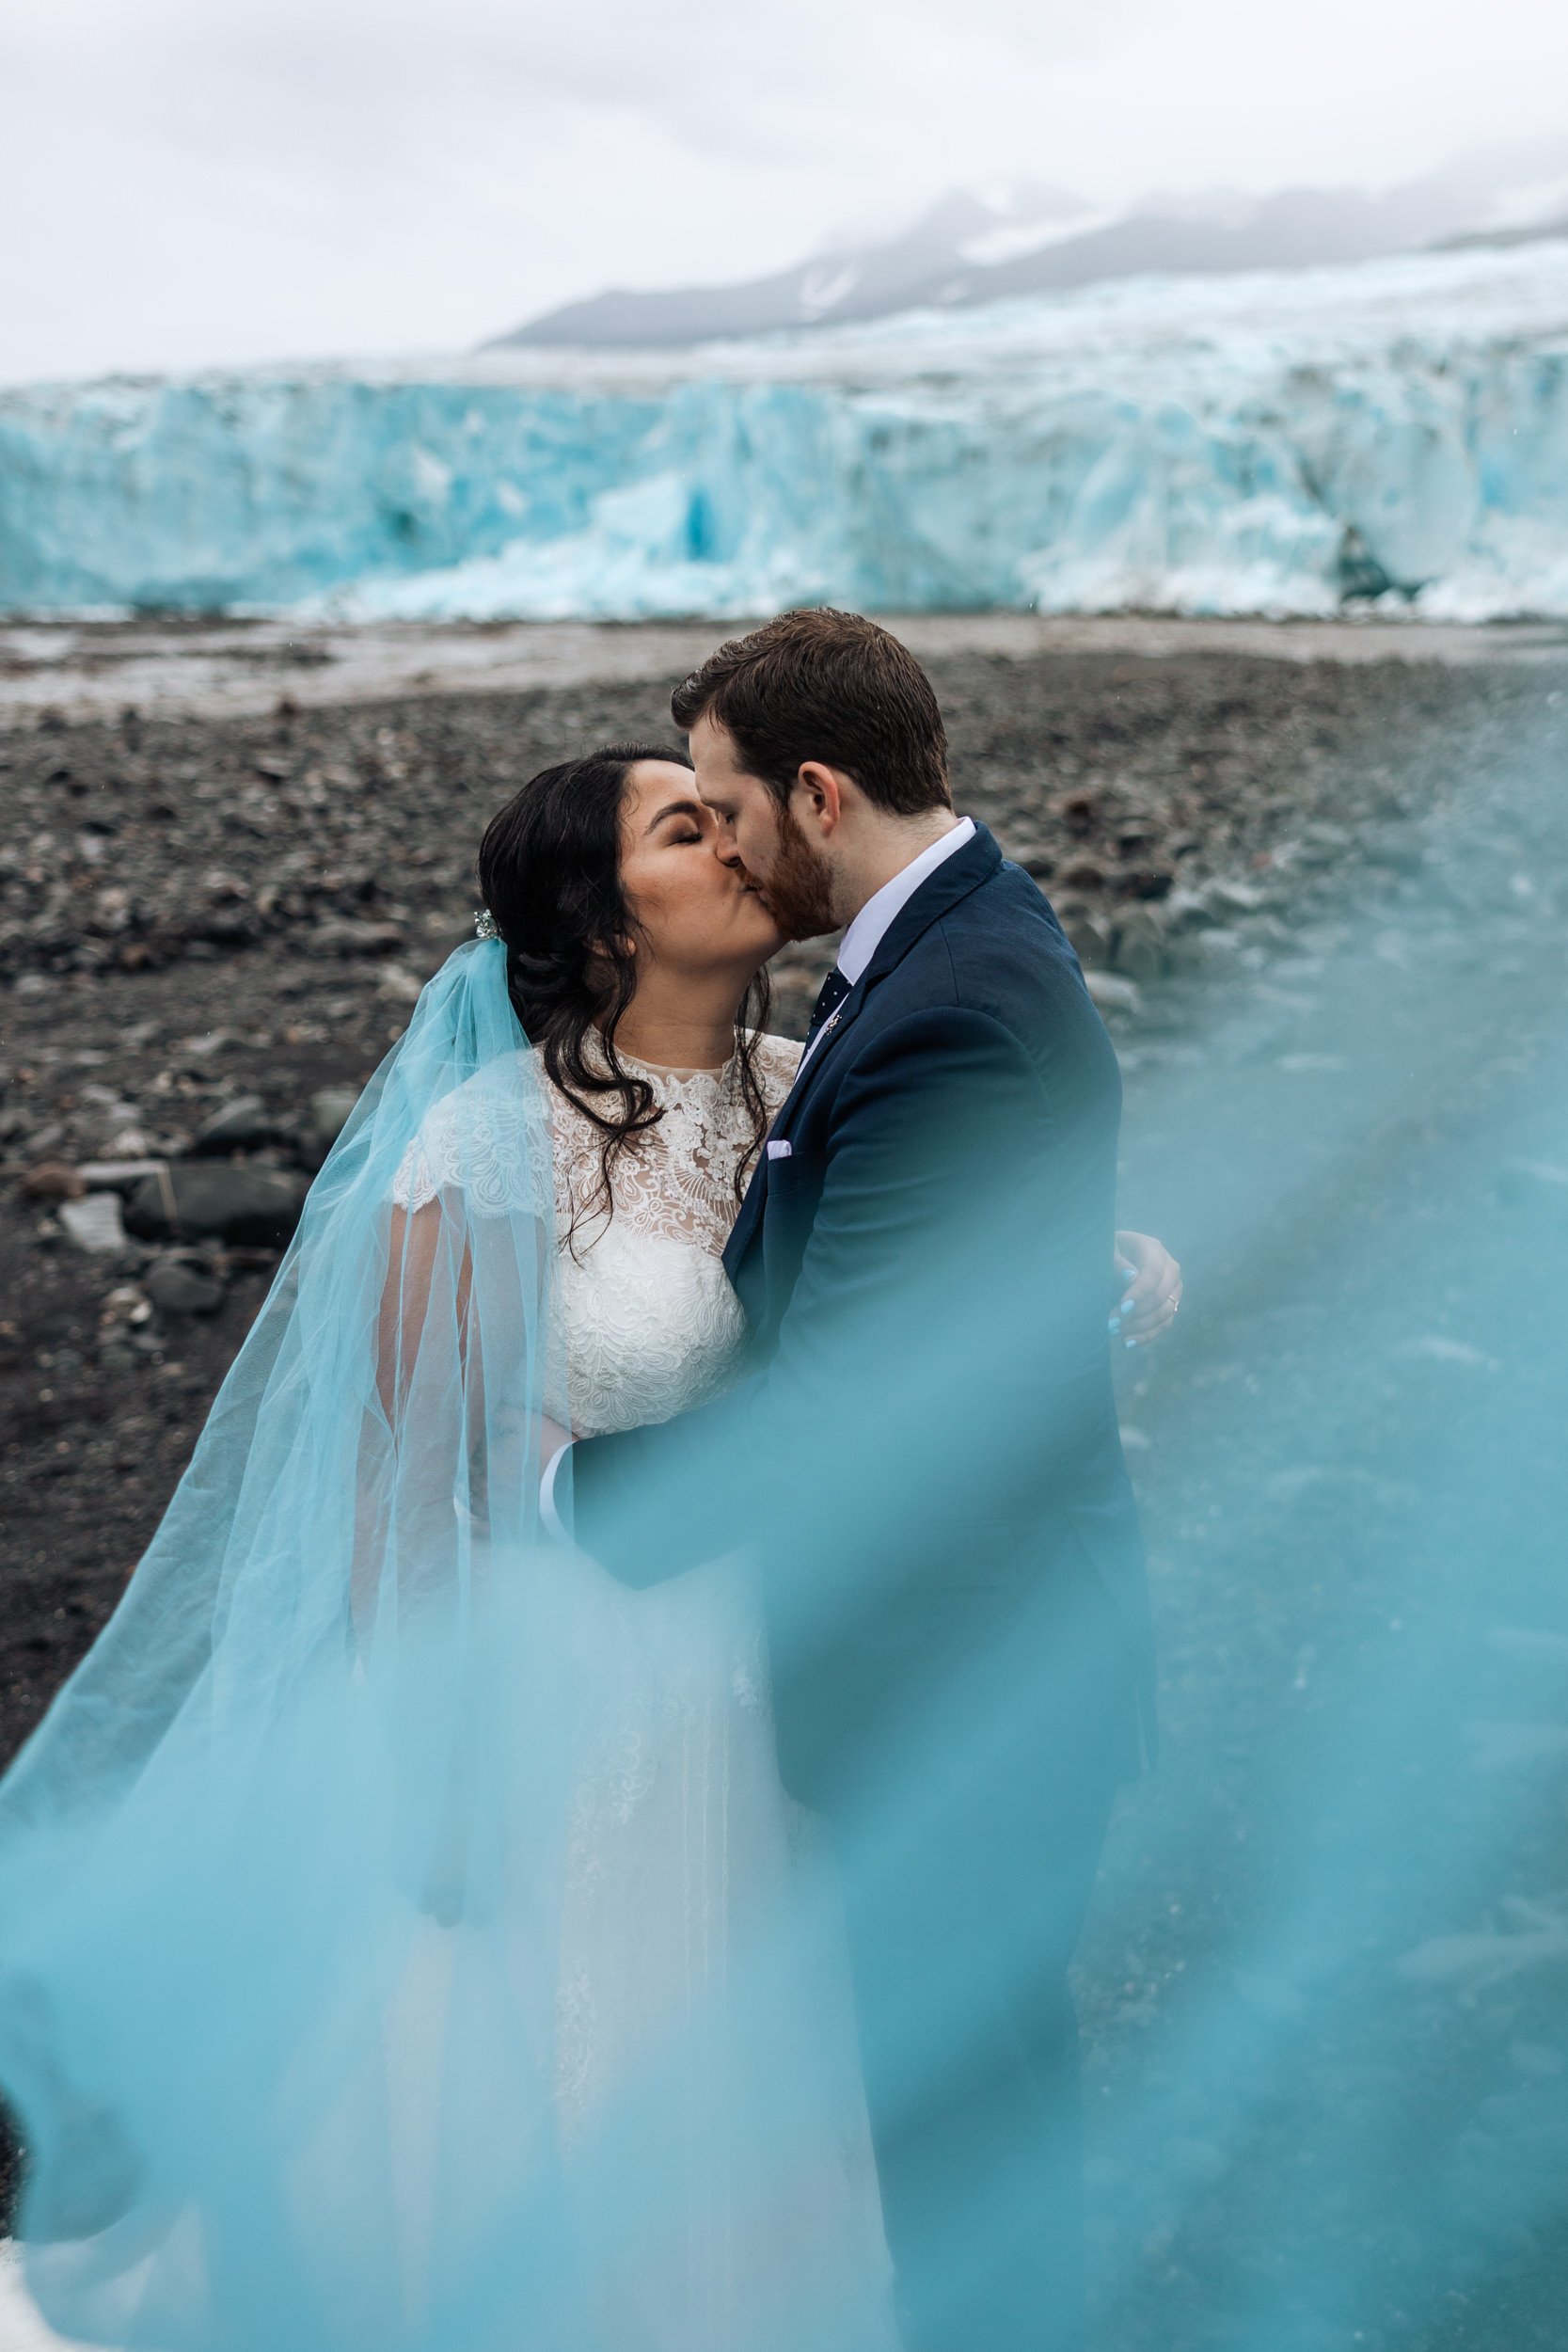 Fall Helicopter Elopement in Alaska